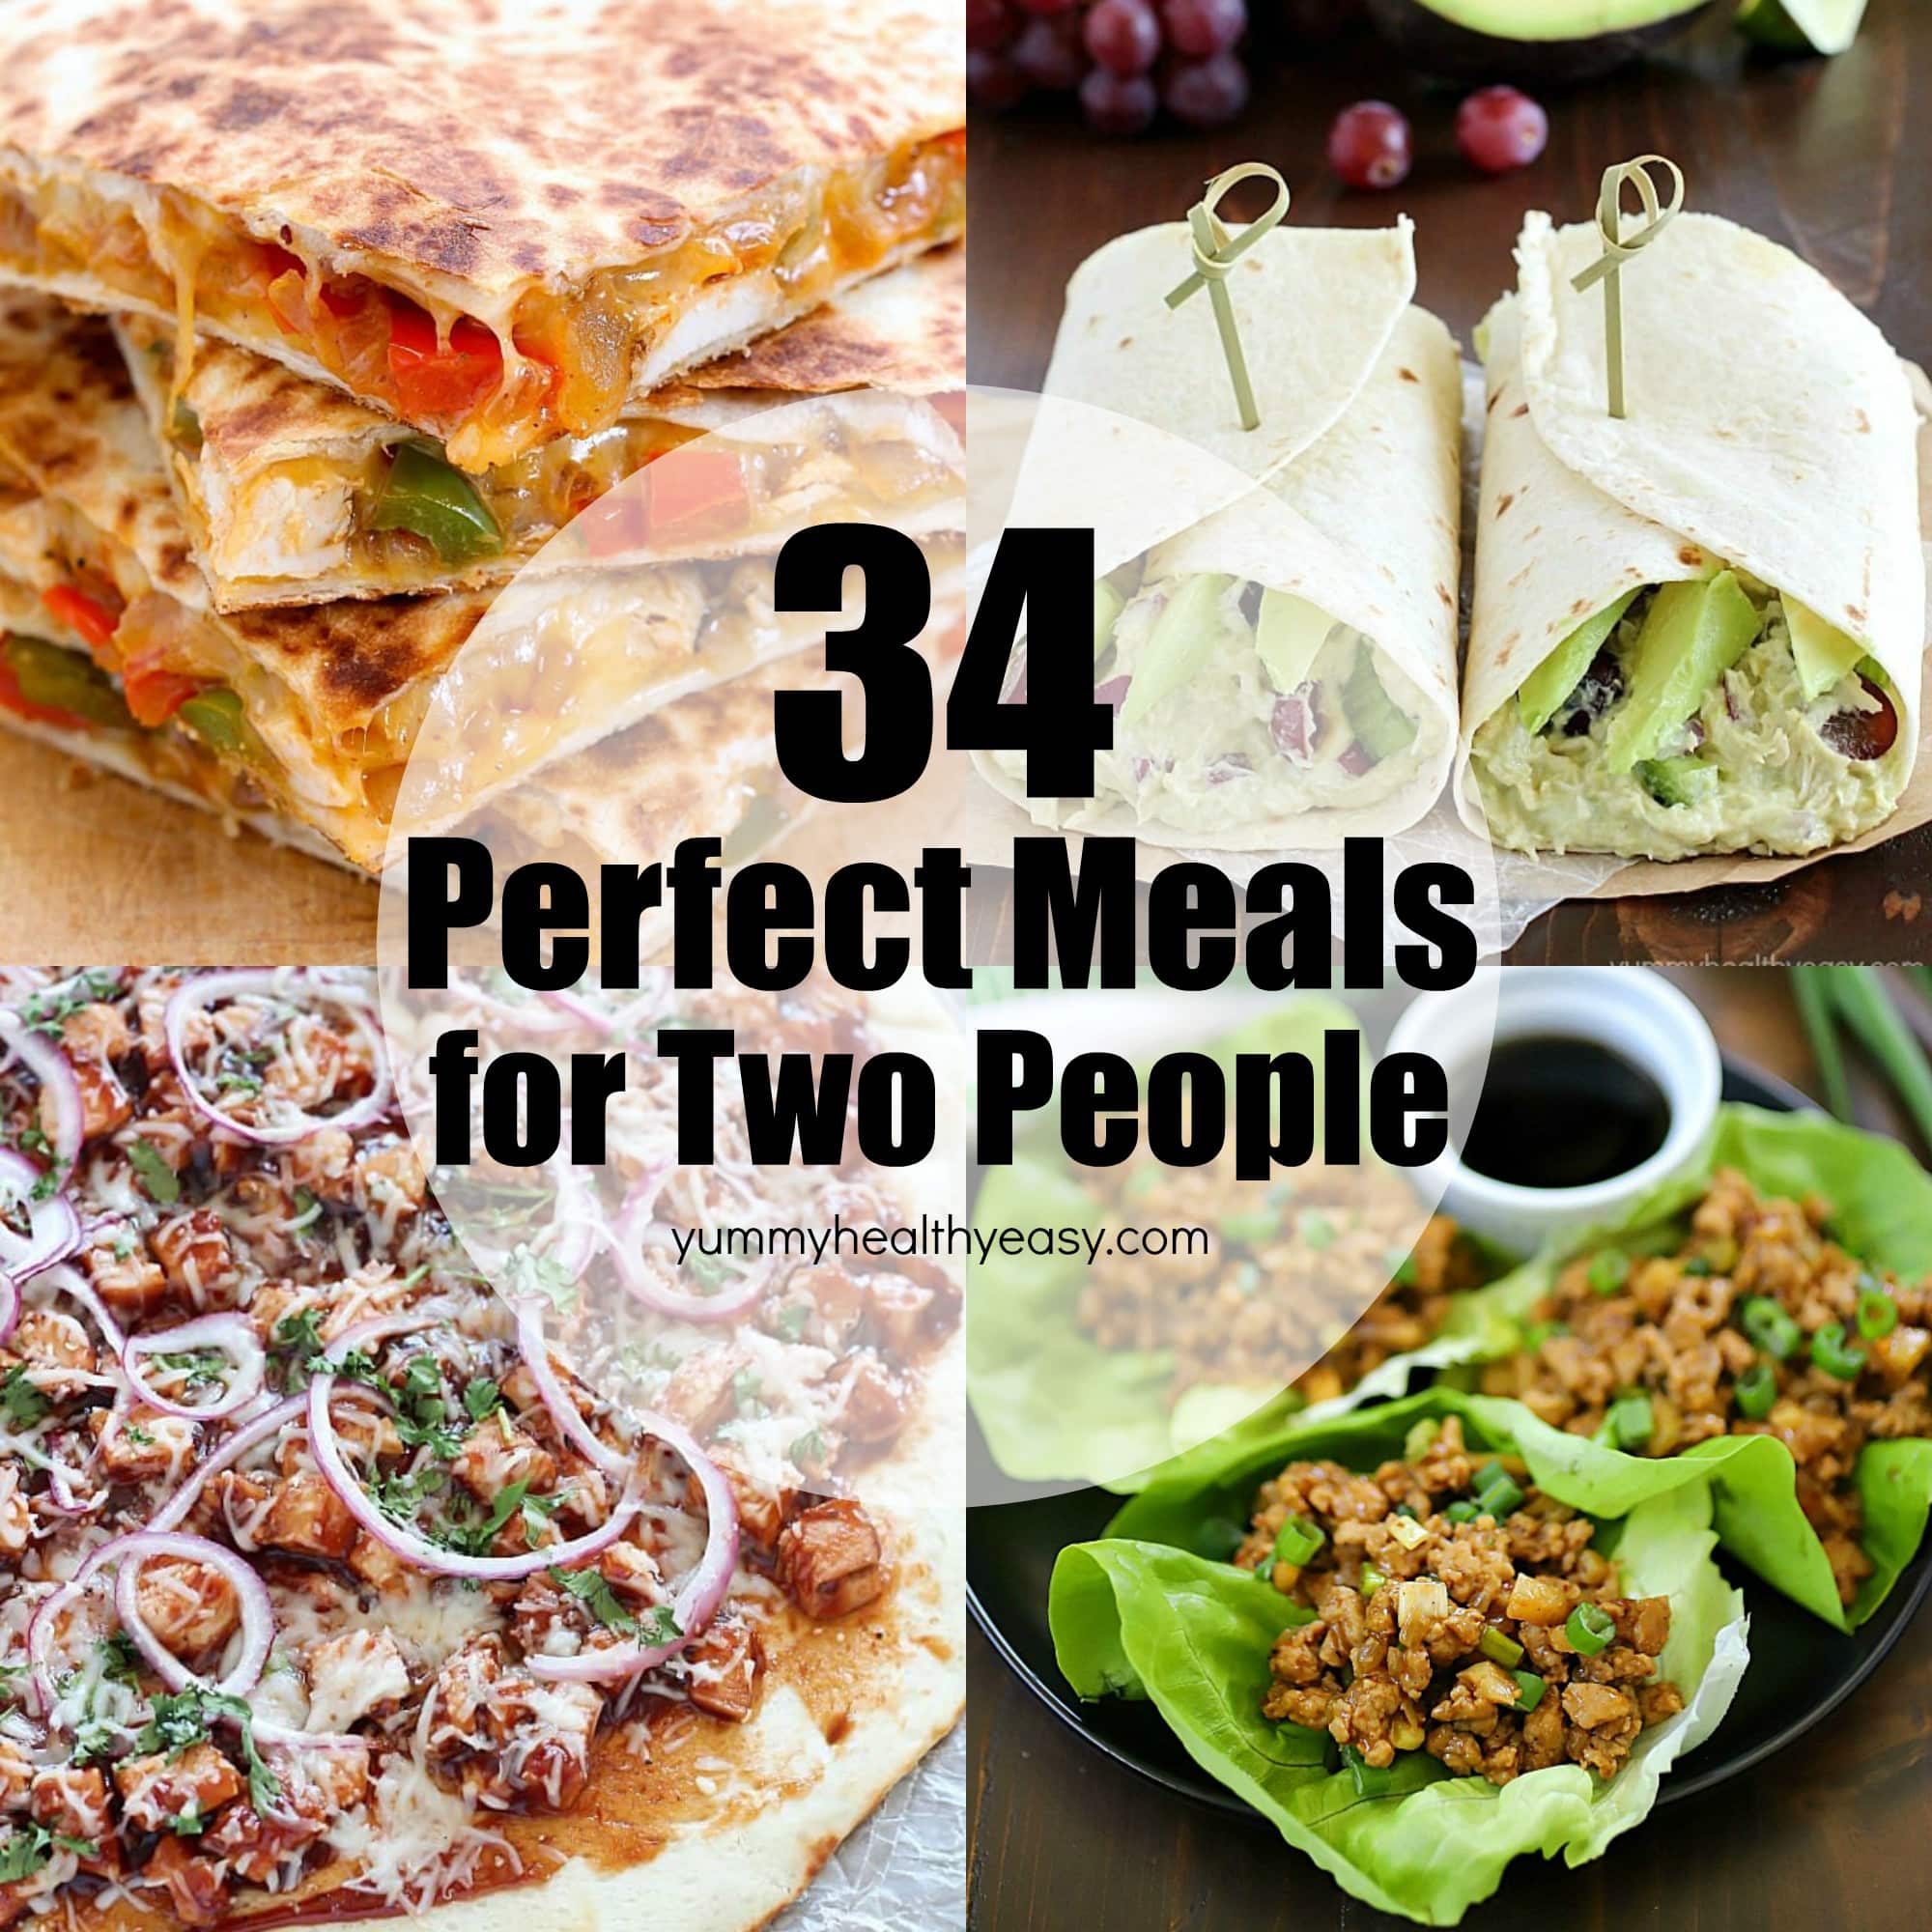 34 Easy Meal Recipes for Two People